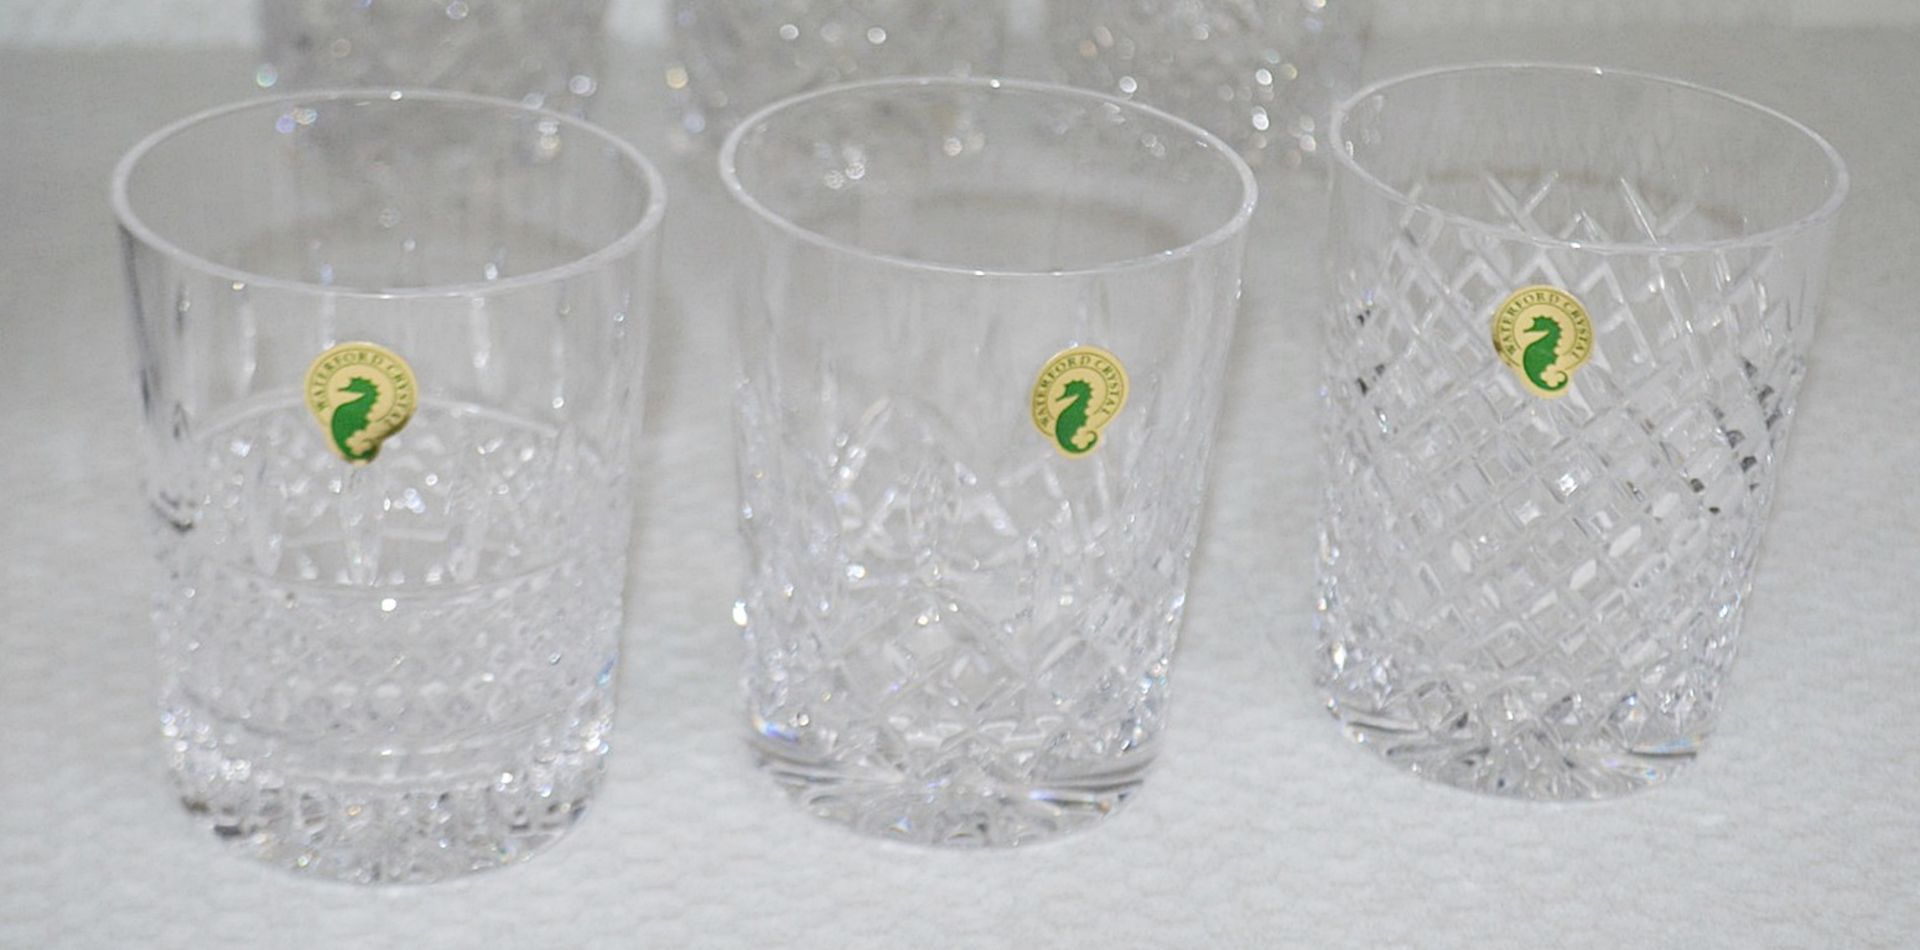 Set of 6 x WATERFORD CRYSTAL 'Lismore' Connoisseur Heritage Tumblers - 400ml - Original RRP £295.00 - Image 5 of 7